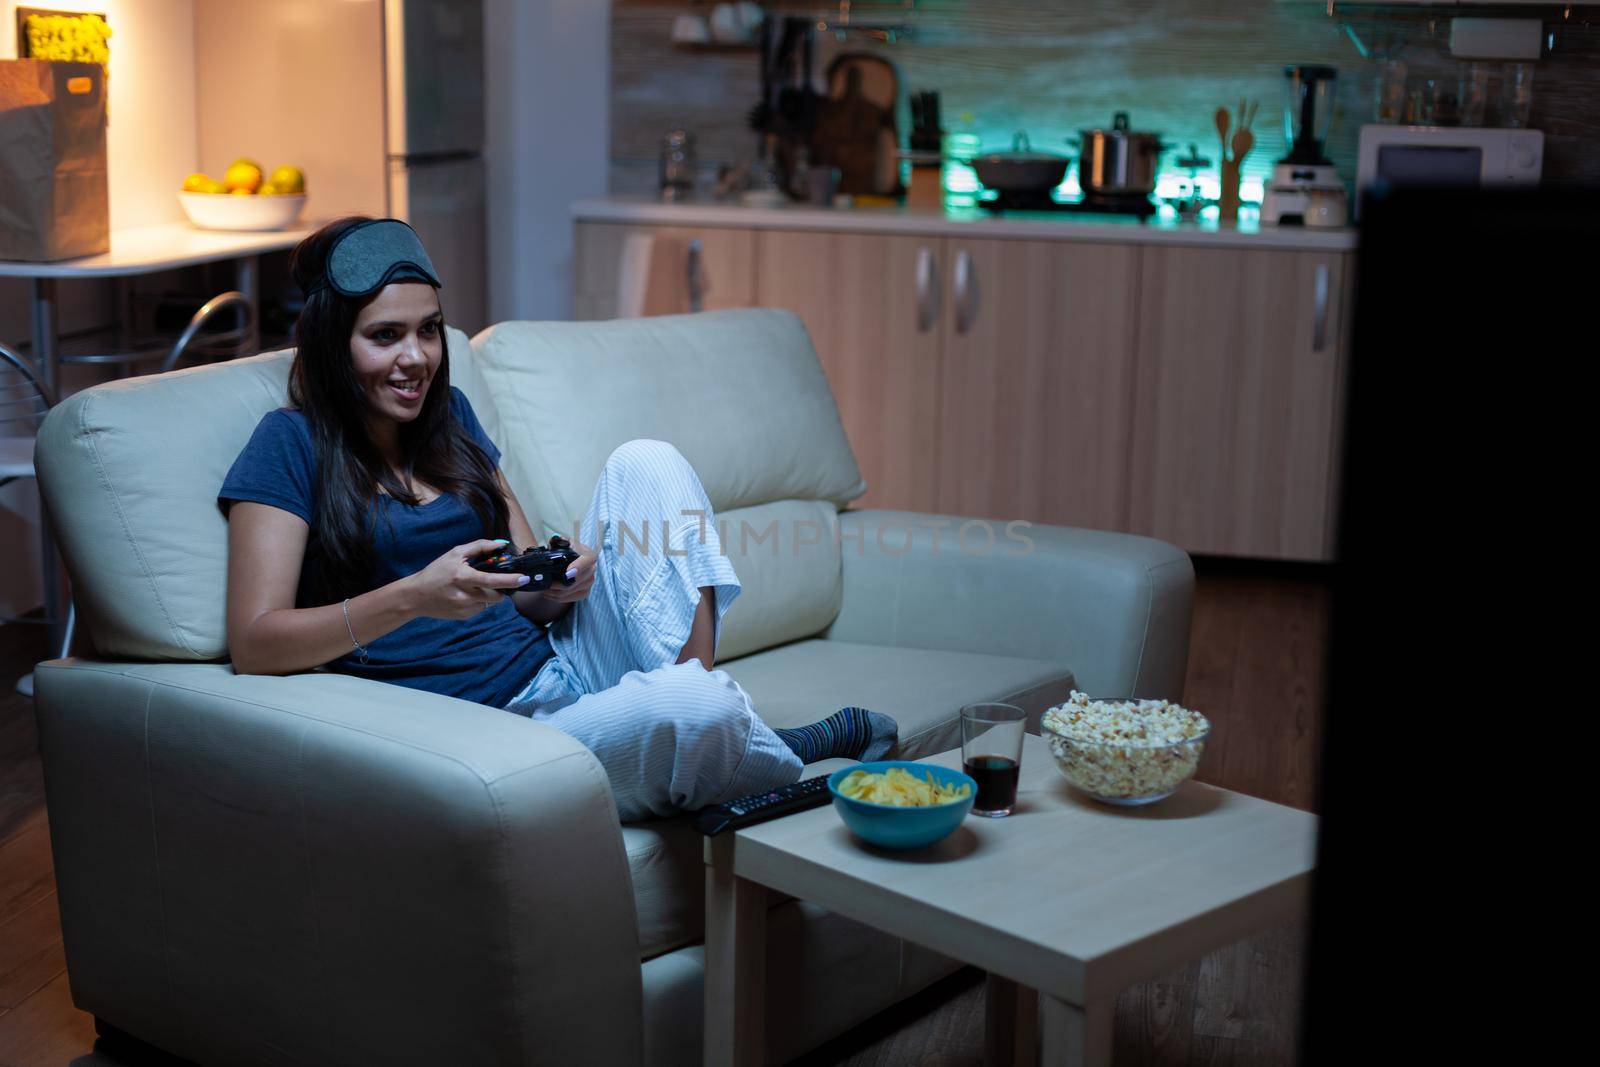 Determined woman playing video game in living room at night. Excited gamer woman sitting on couch, playing and winning video games using console and wireless controller.